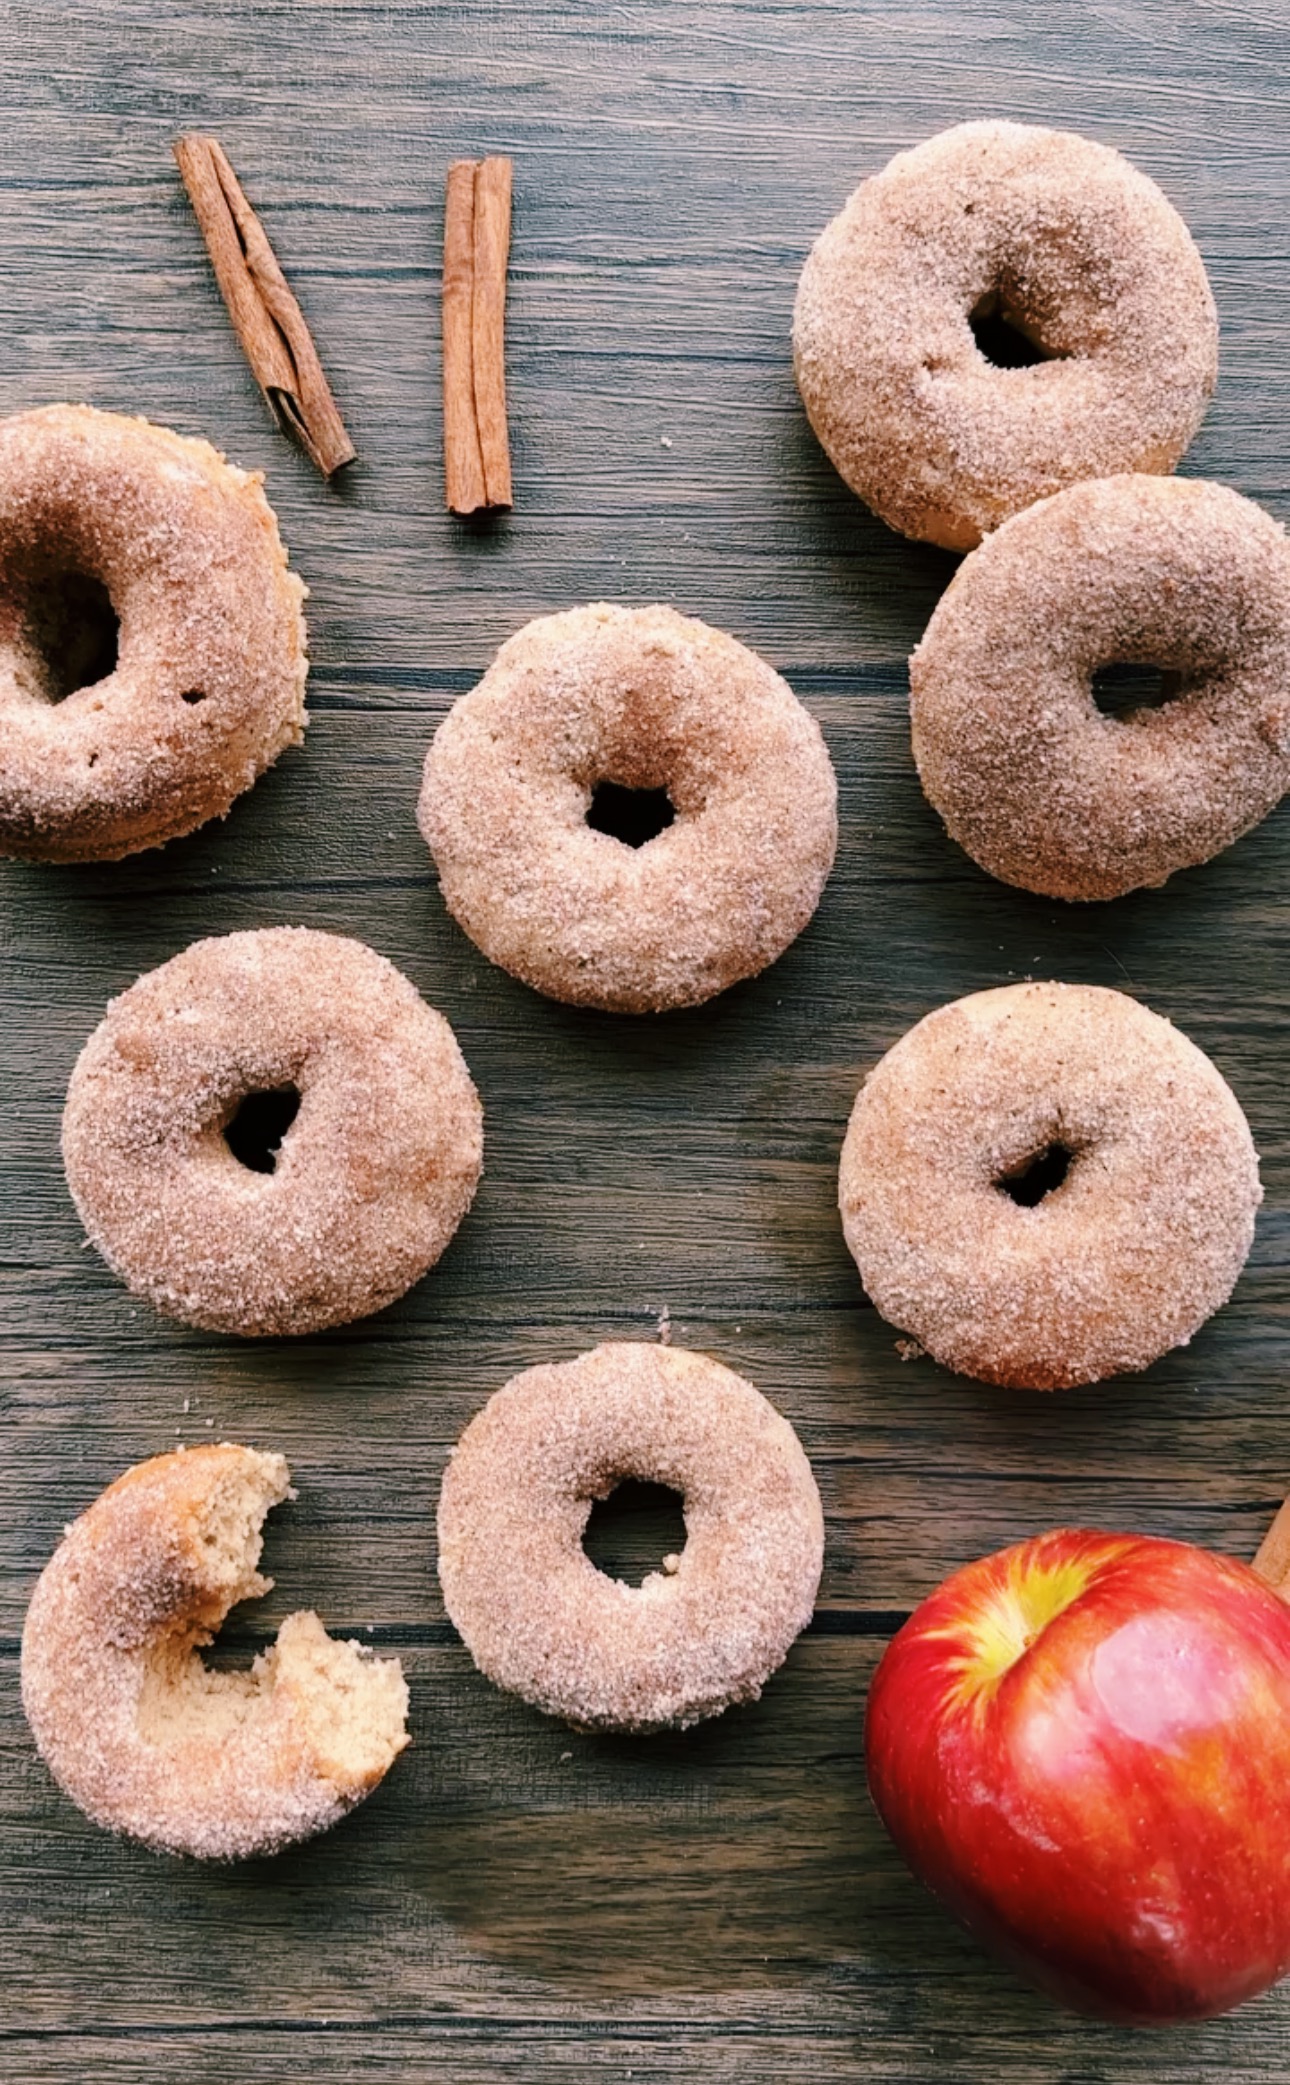 Apple Cider Donuts- Baked Donuts